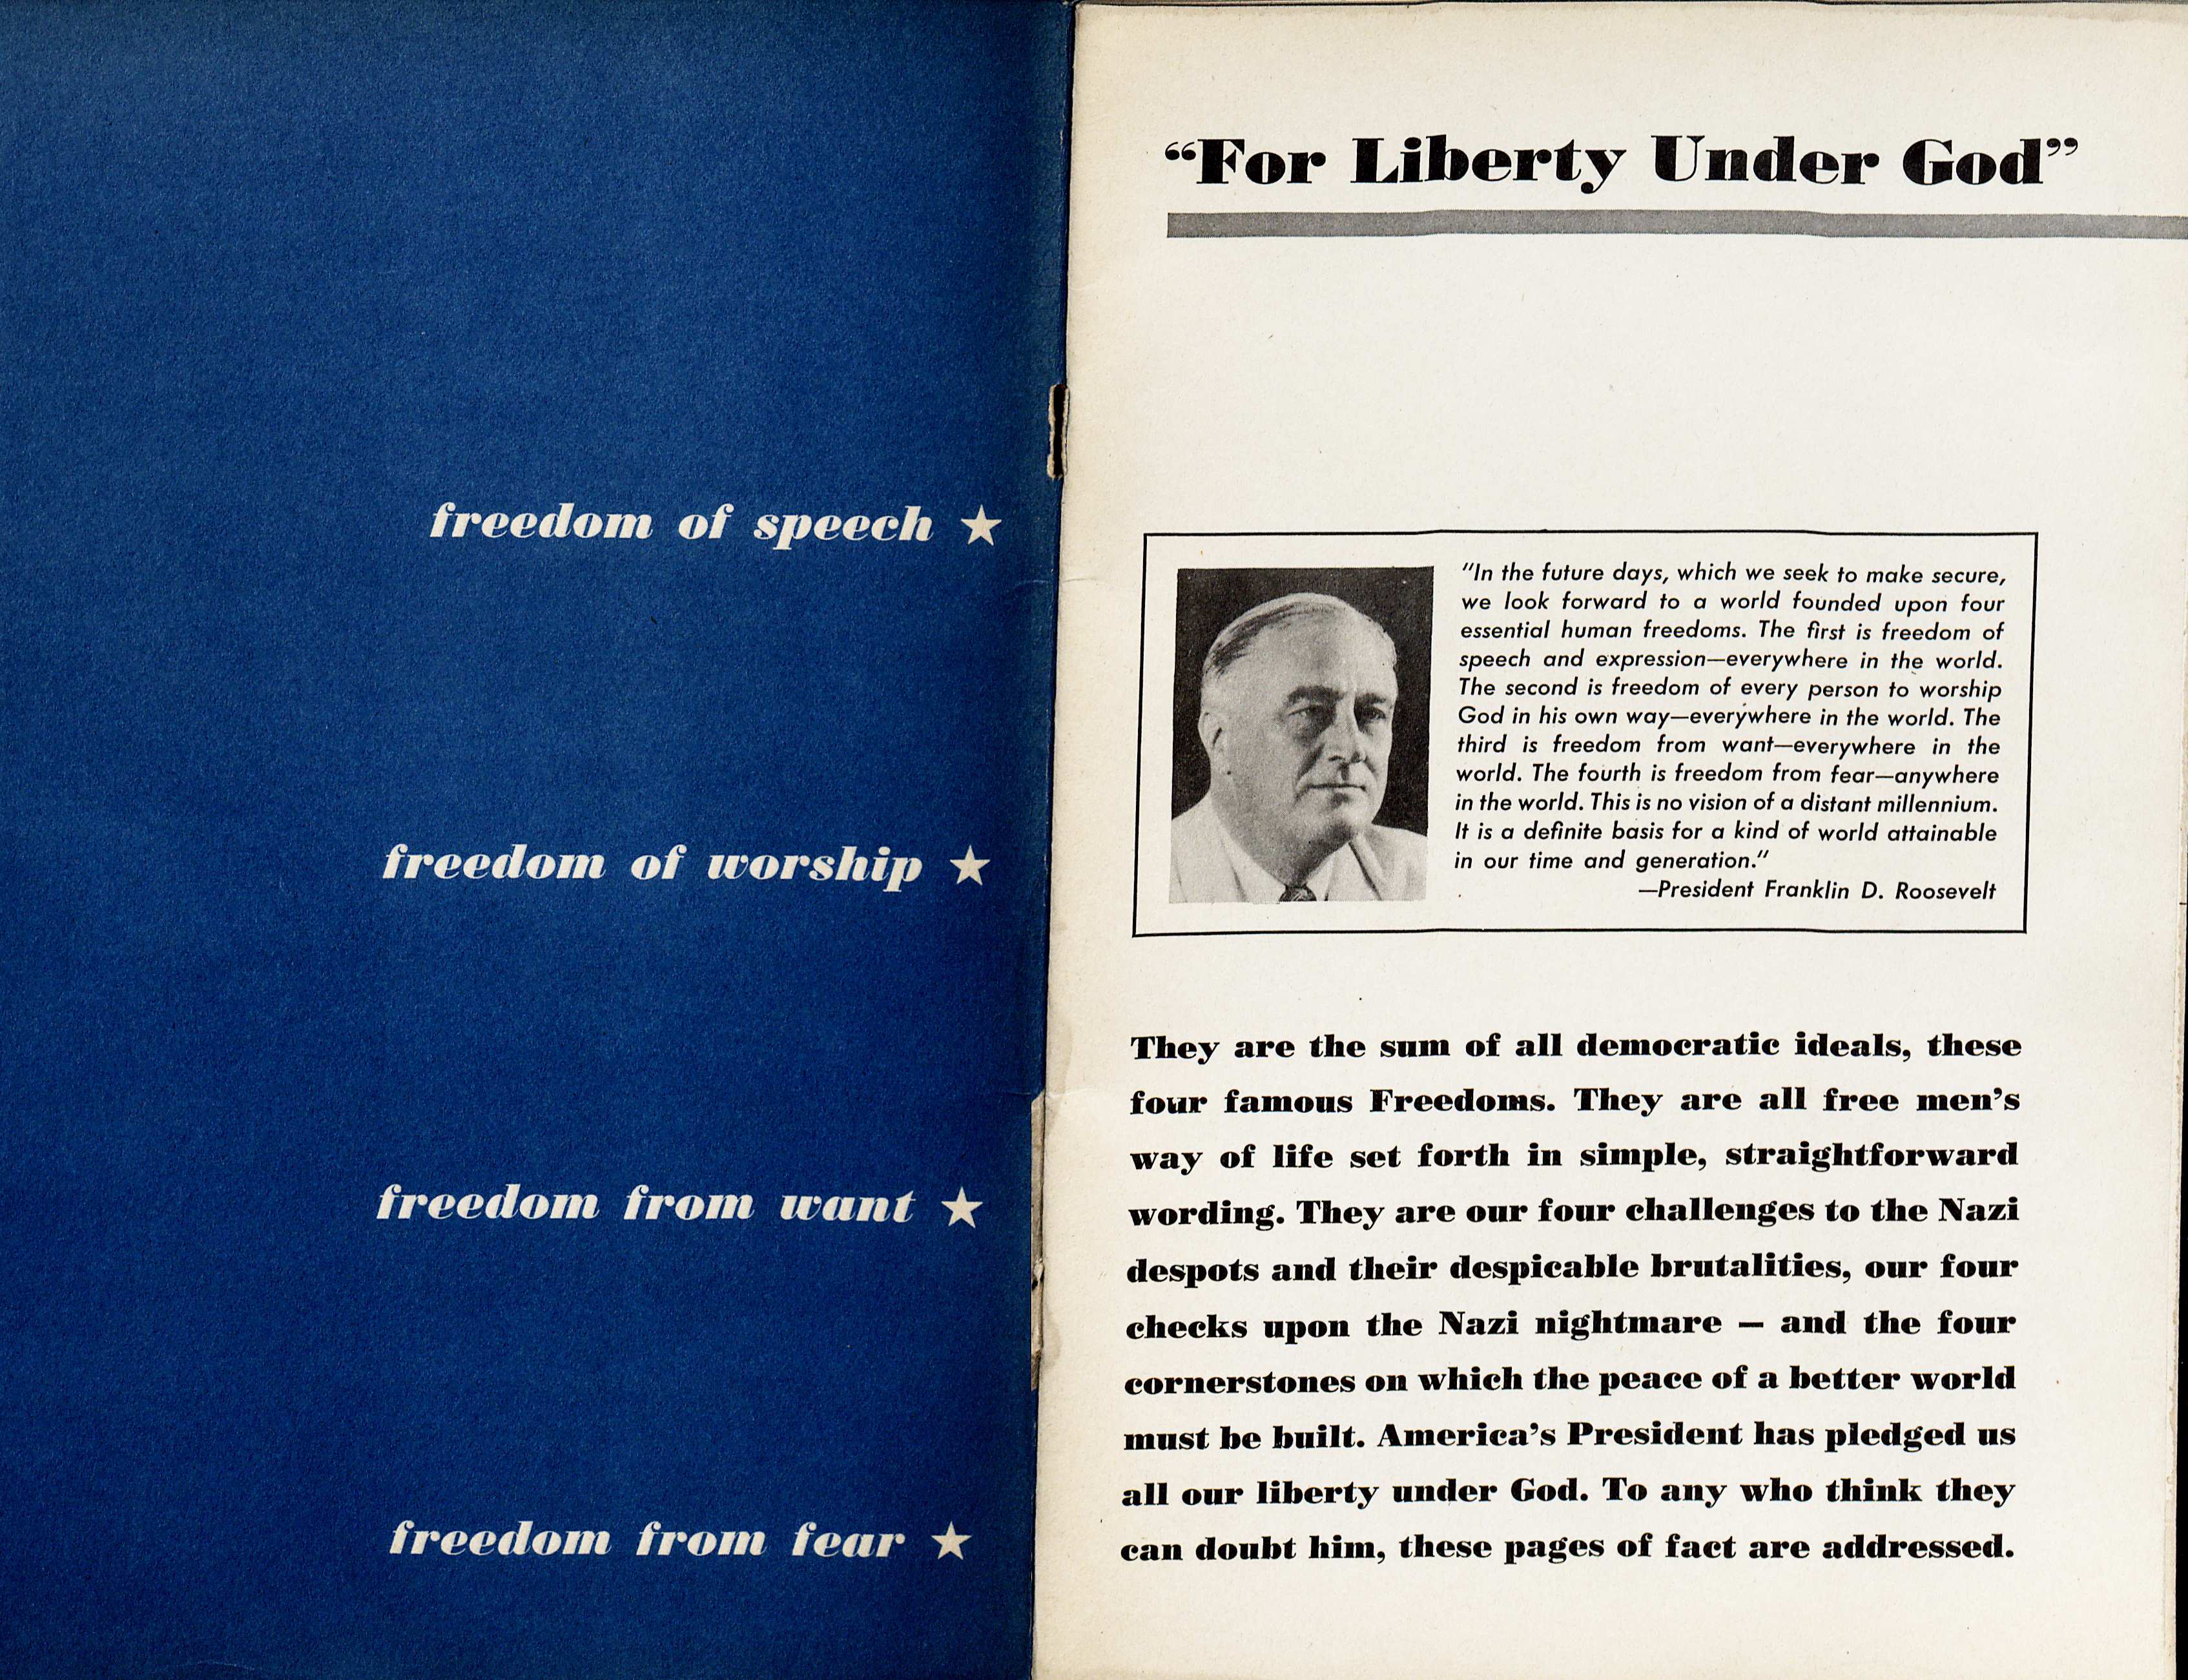 United States of America. Four Freedoms Booklet. Louis G. Cowan World War II Propaganda Collection, 1941-1946  (MSS 11569) Based on Franklin D. Roosevelt’s Four Freedoms speech, this booklet elaborates how the freedoms of speech and worship and the freedoms from want and fear operated in America. The booklet contrasts pictures of America’s happy children, education systems, and plentiful harvests with pictures of the violence, government restrictions, and food lines in Axis countries in order to promote the Allied war efforts. 